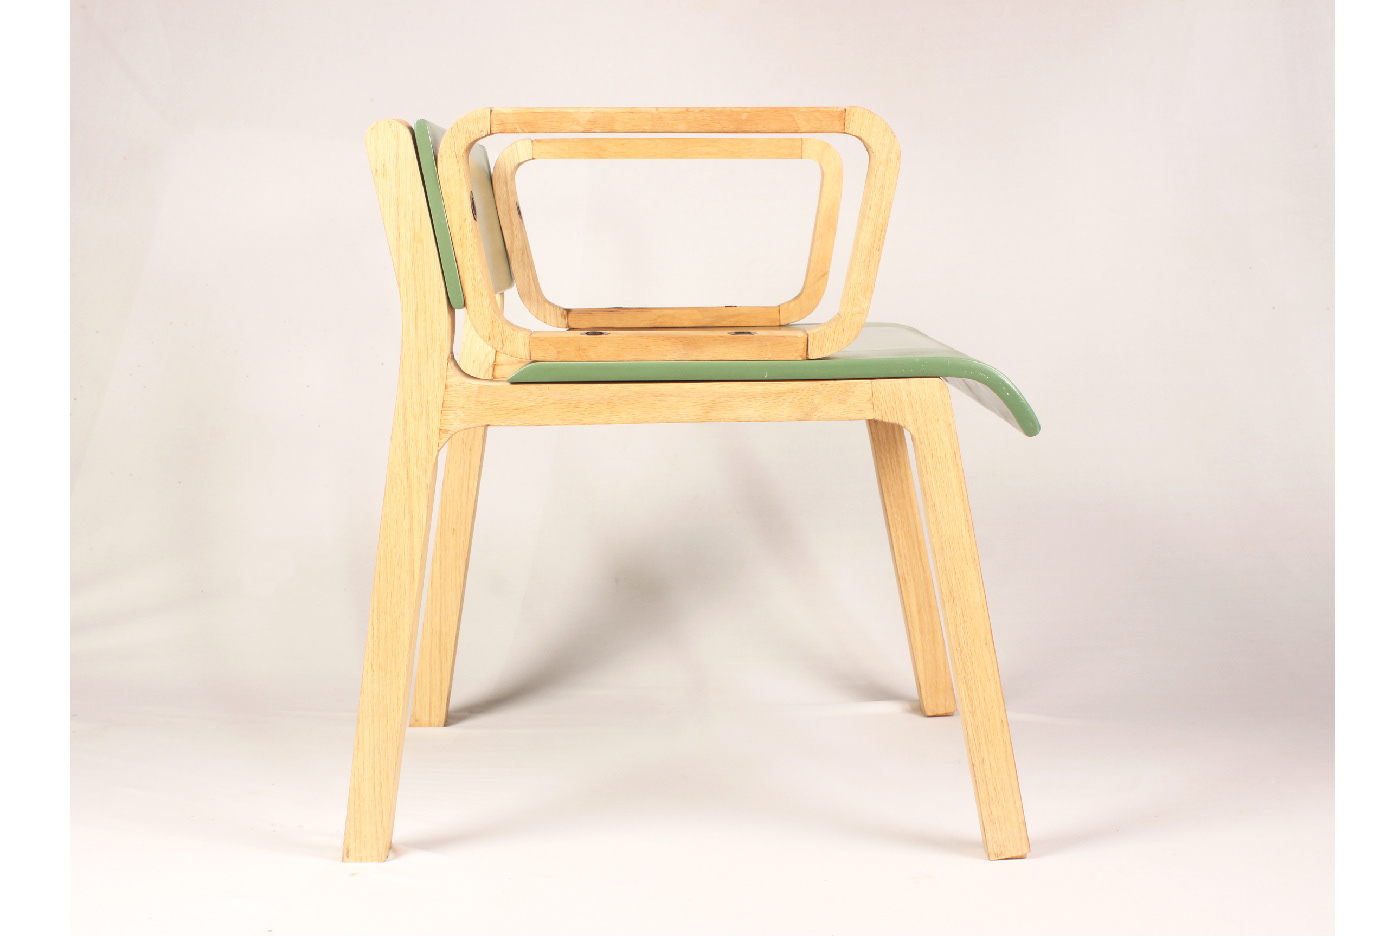 chair Prototyping knock-down furniture